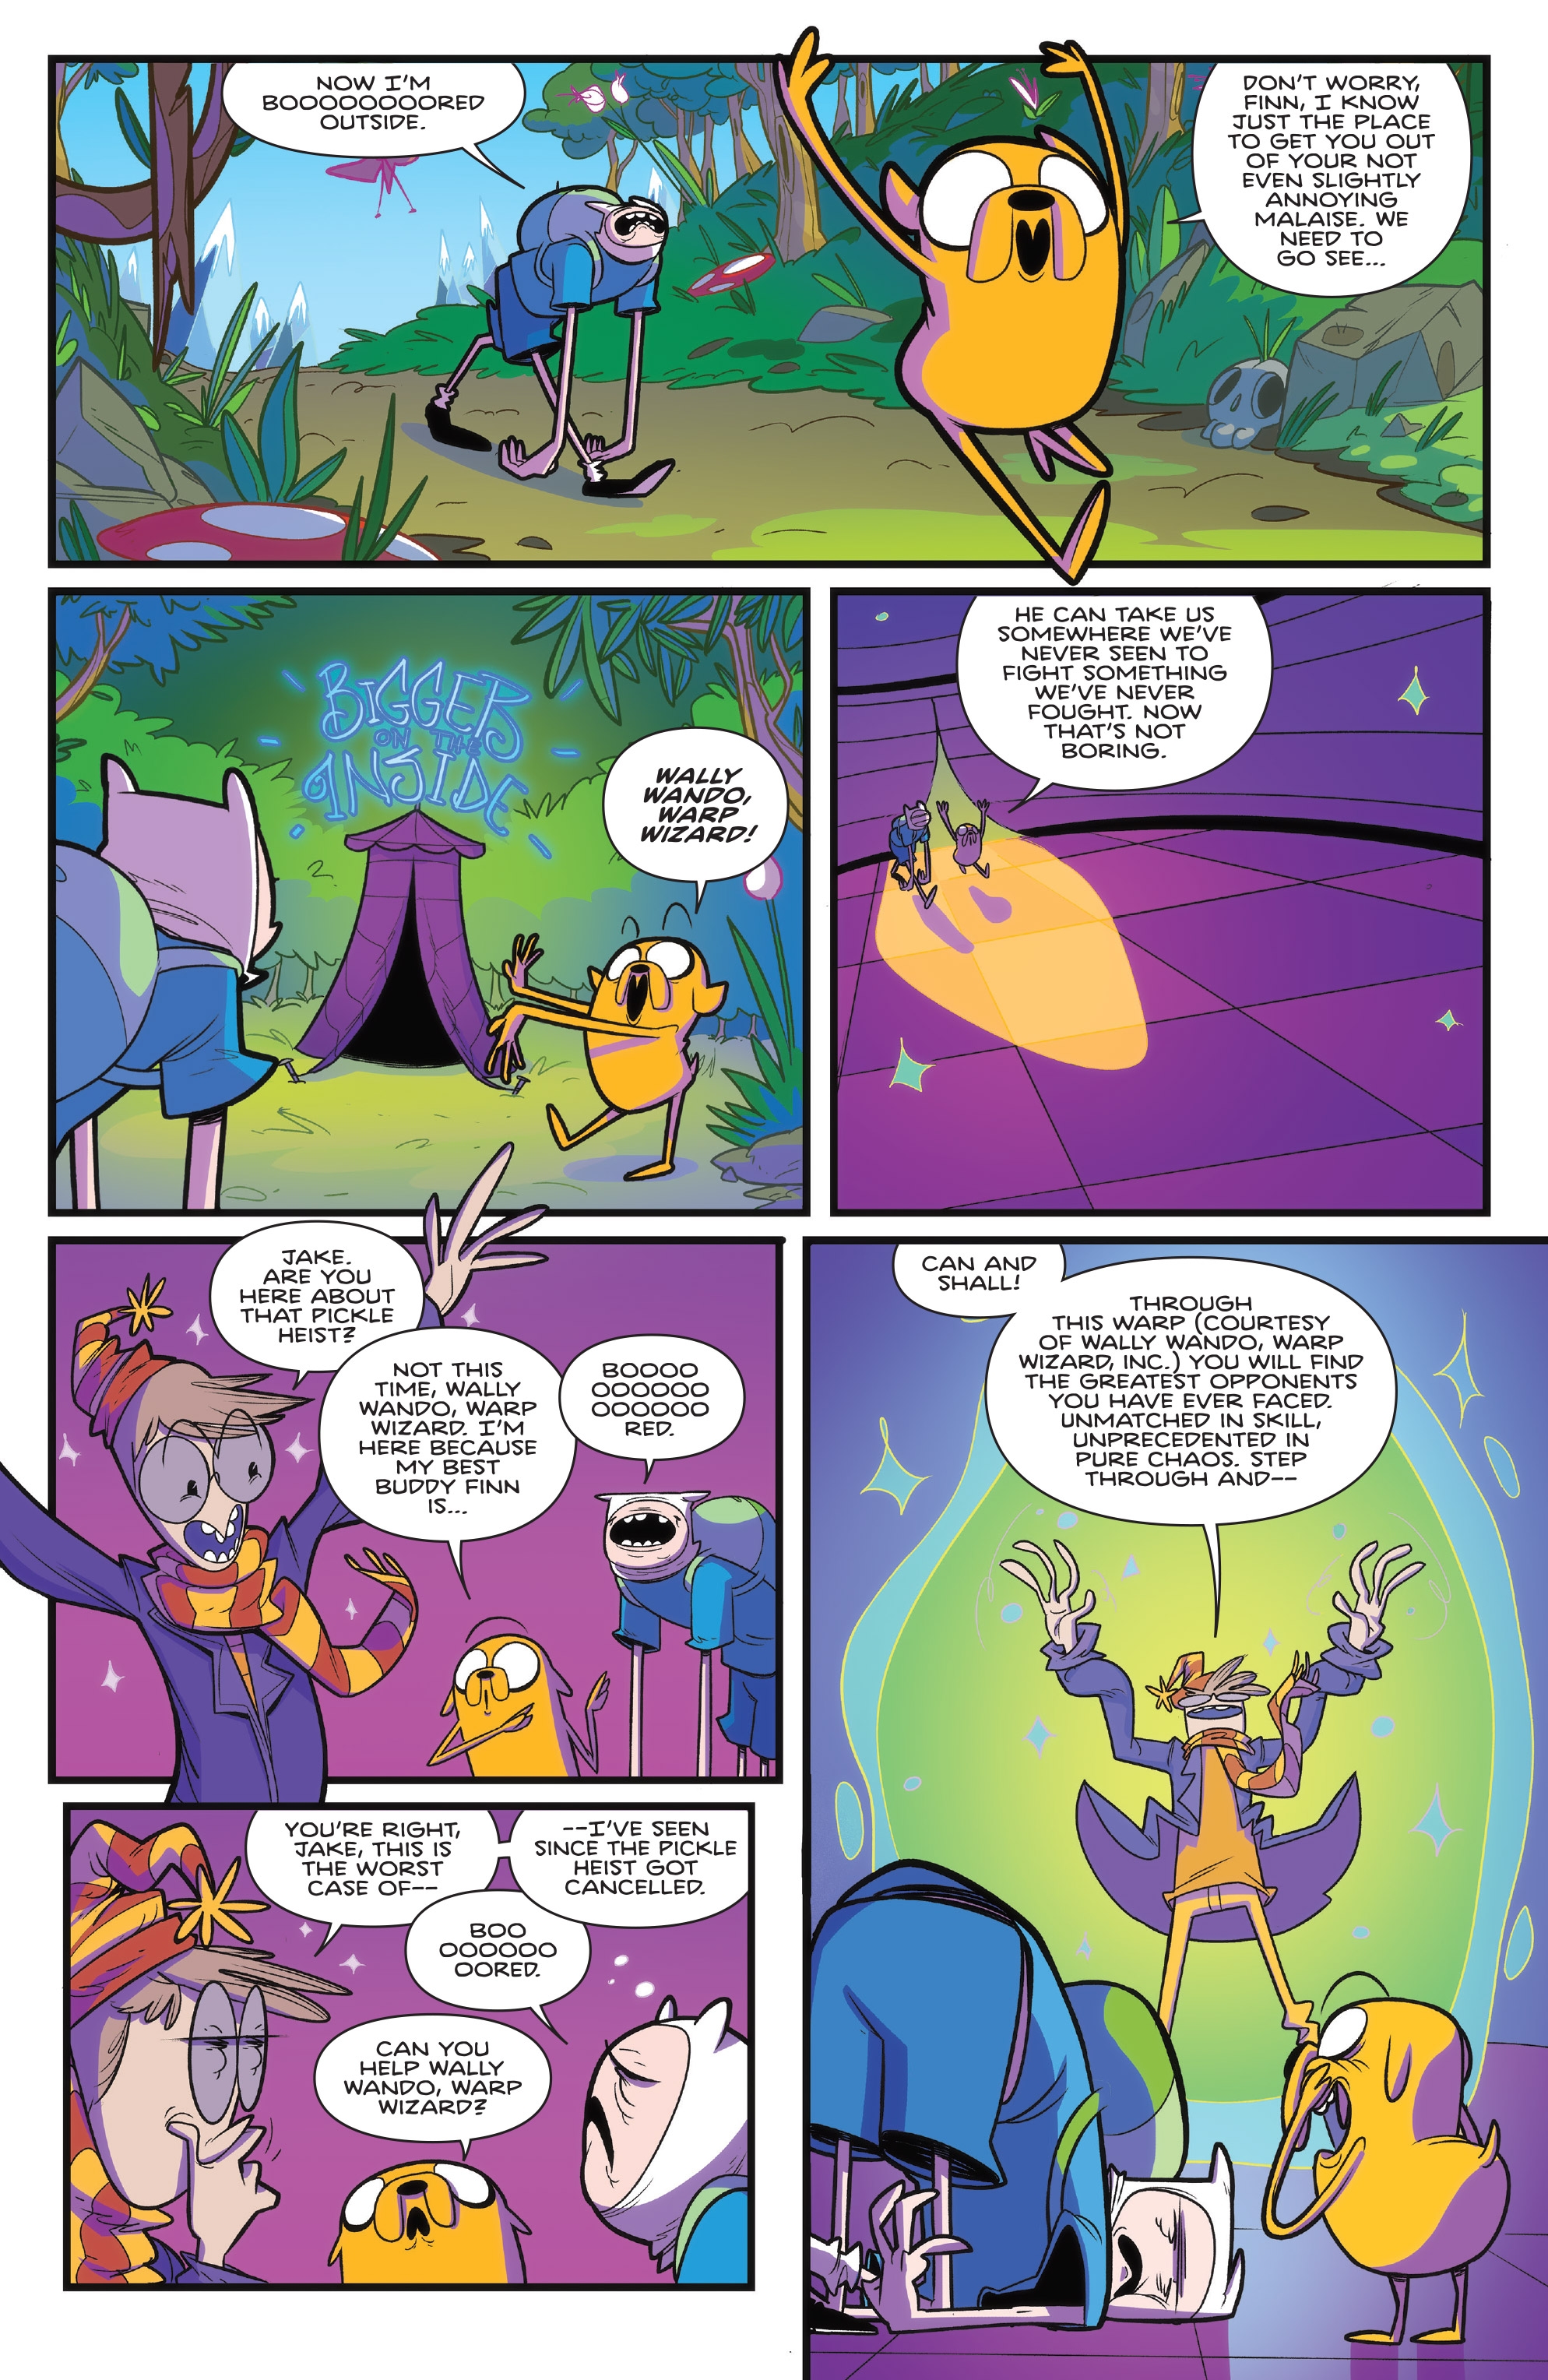 Adventure Time Comics (2016-): Chapter 14 - Page 4